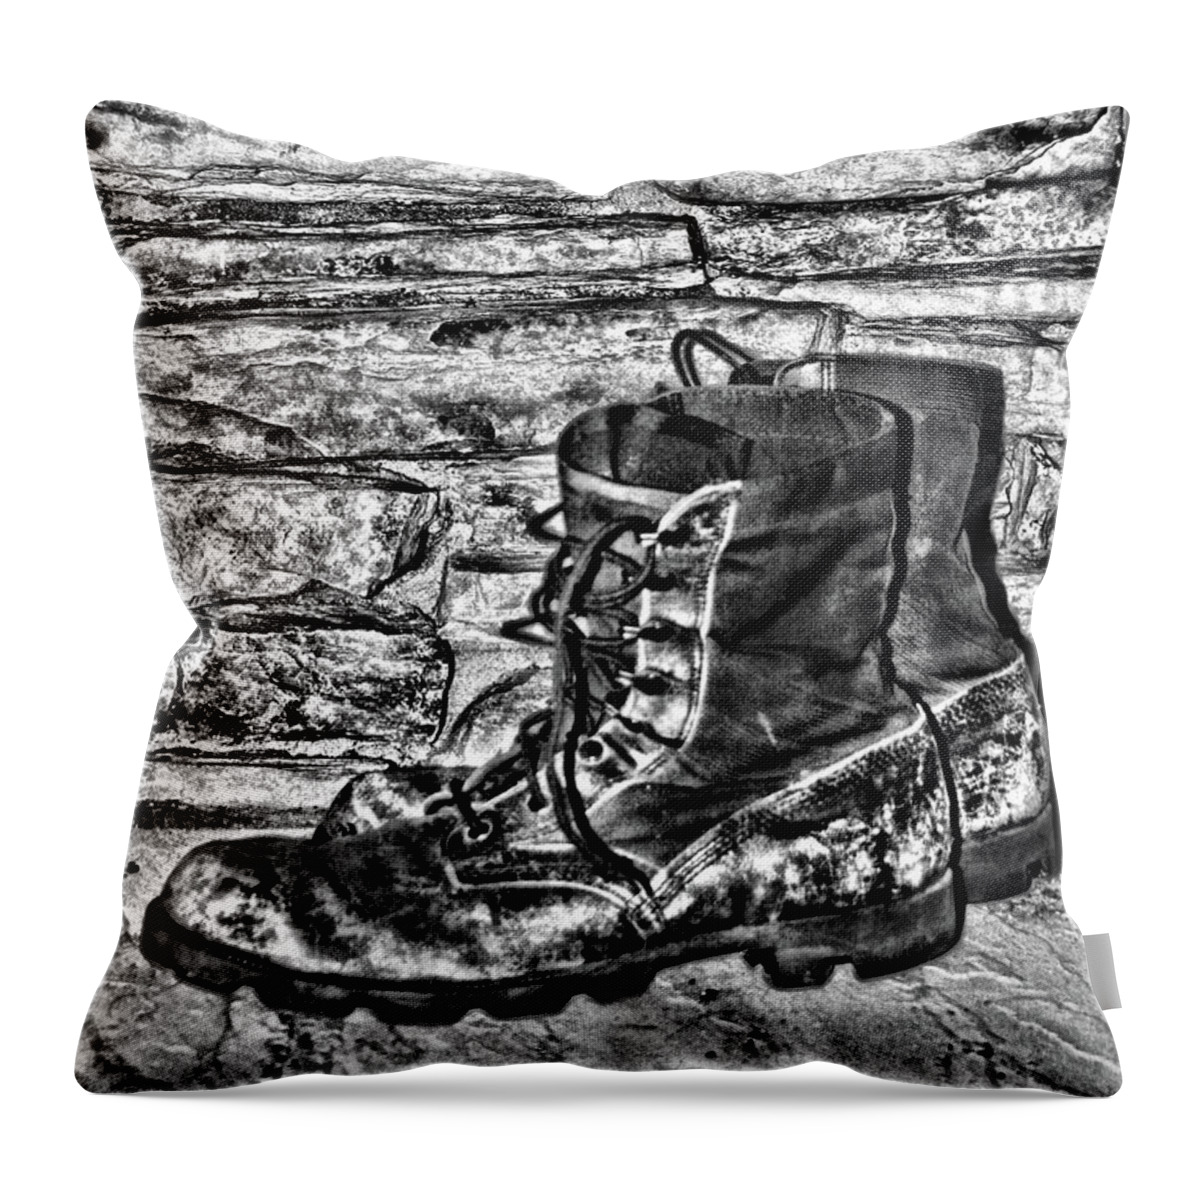 Bricks Throw Pillow featuring the photograph The Old Work Boots by Cathy Harper